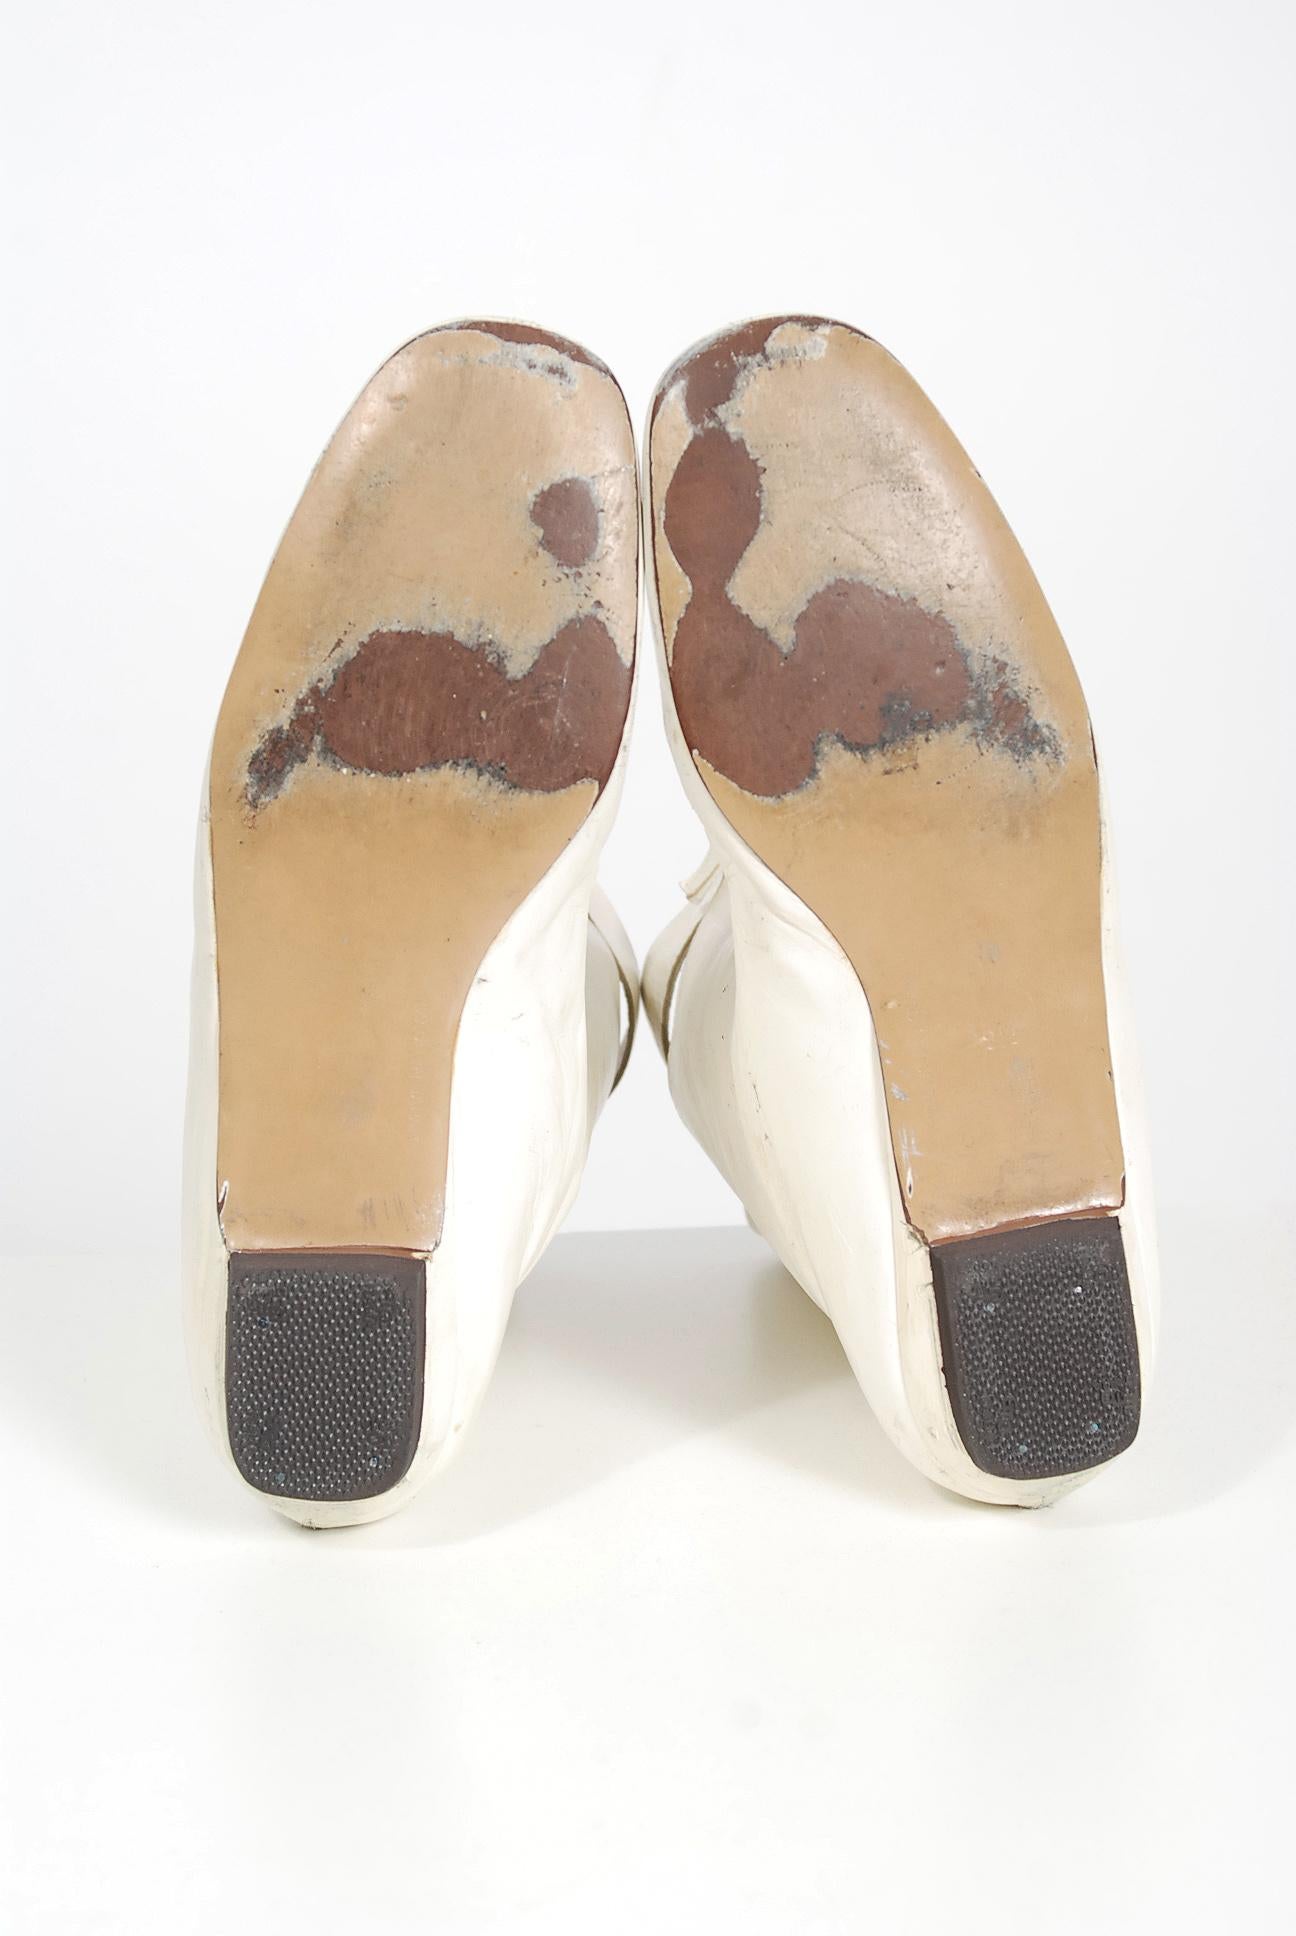 Women's Courreges Couture White Leather Cut Out Mod Space Age Flat Go-Go Boots, 1965 